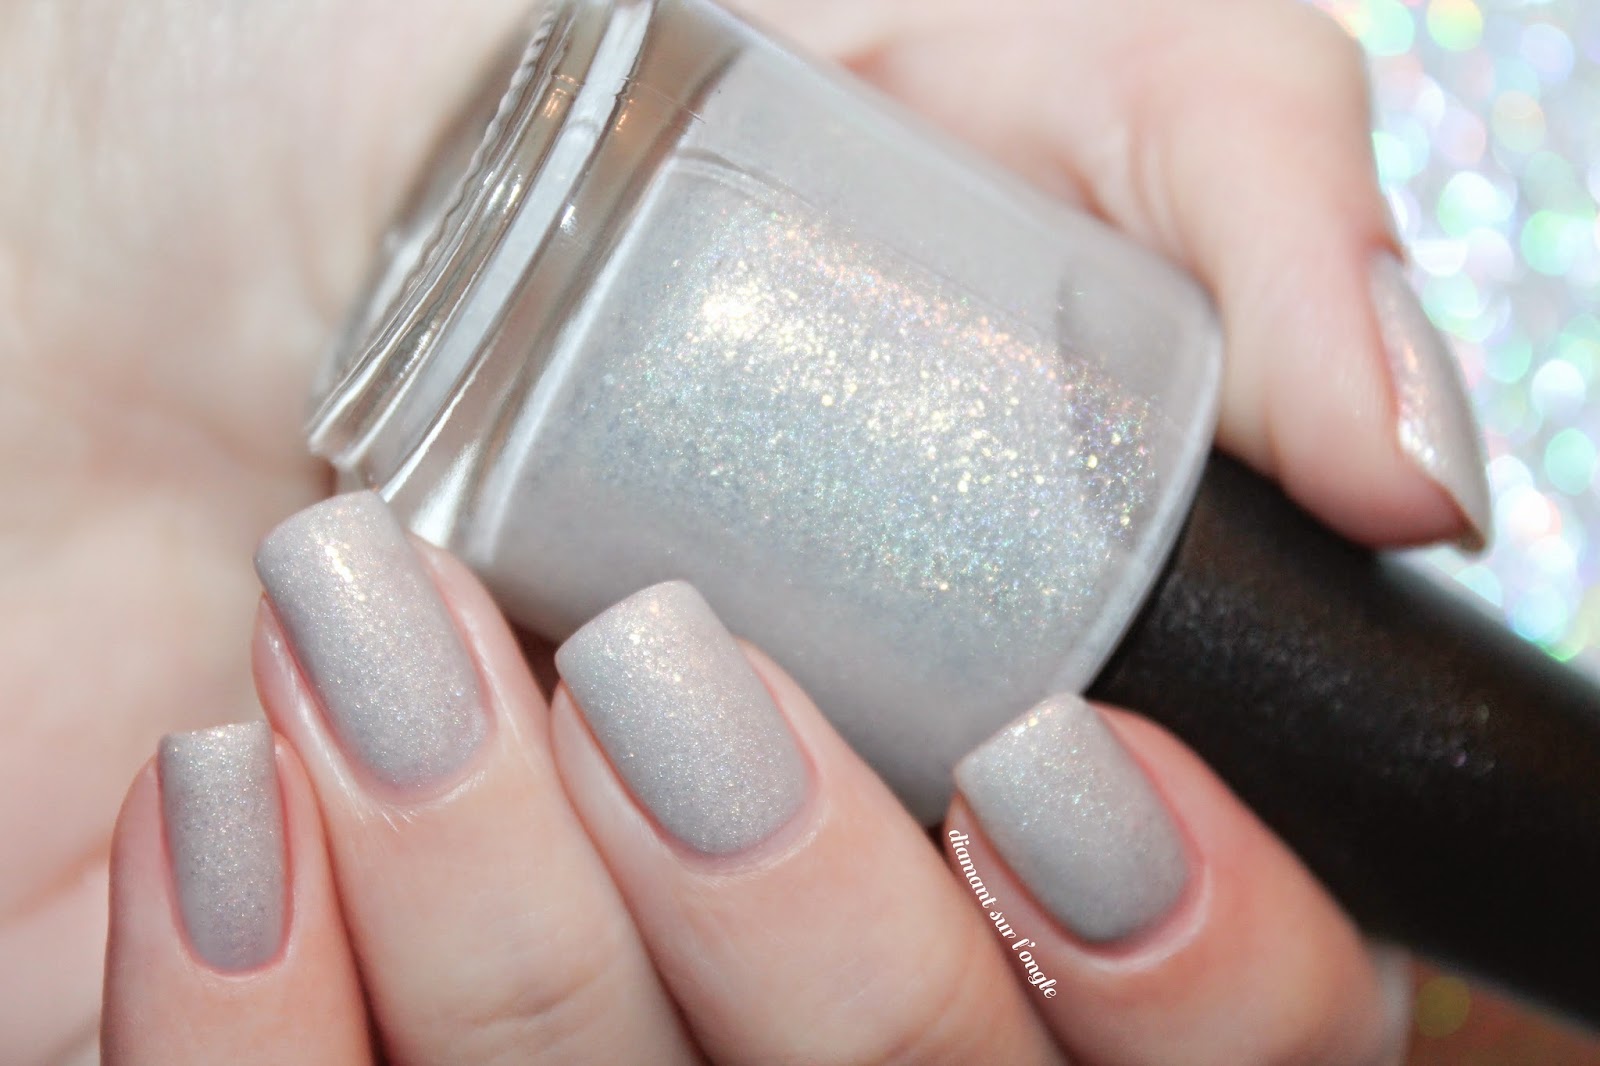 Swatch of Lunar Lights by Lilypad Lacquer